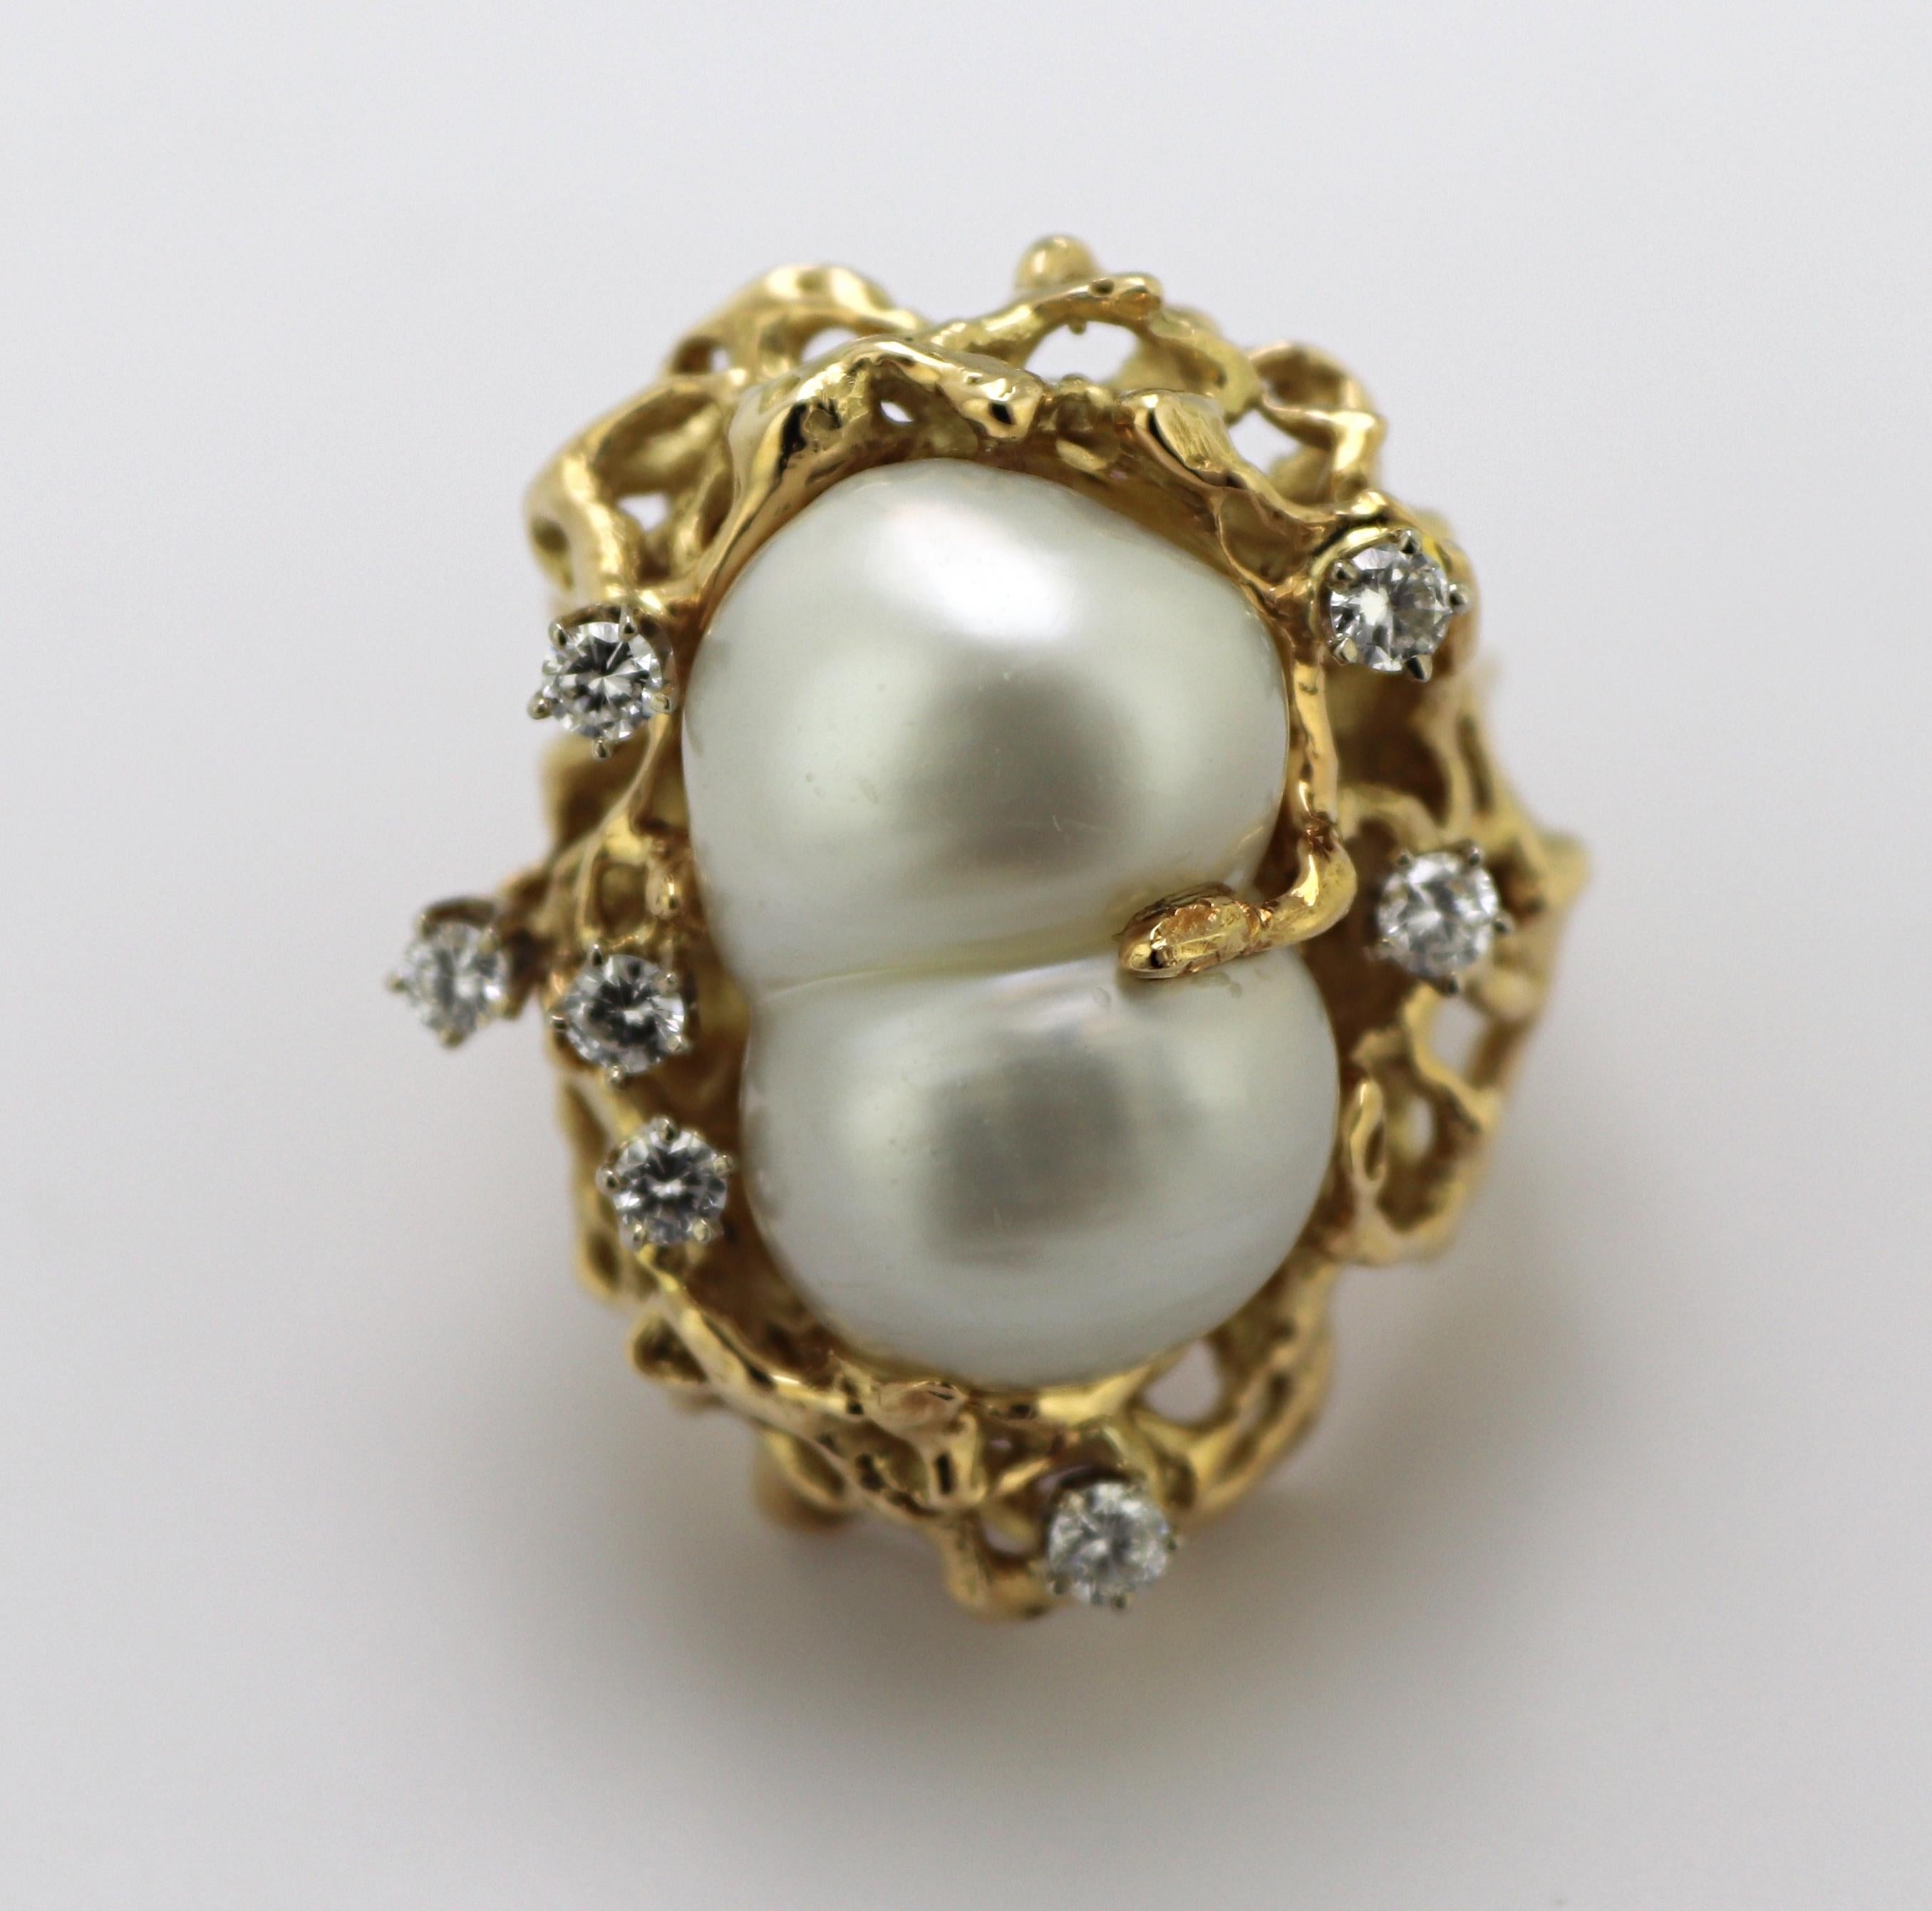 Featuring one baroque double South Sea cultured pearl, 20 X 12.5 mm,
accented by (7) full-cut diamonds, 0.50 ct. tw., SI, I-J, set in a free forms
naturalistic brutalist mounting 28.6 X 23.6 X 7.9 mm, size 7, Gross Weight
21.8 grams.